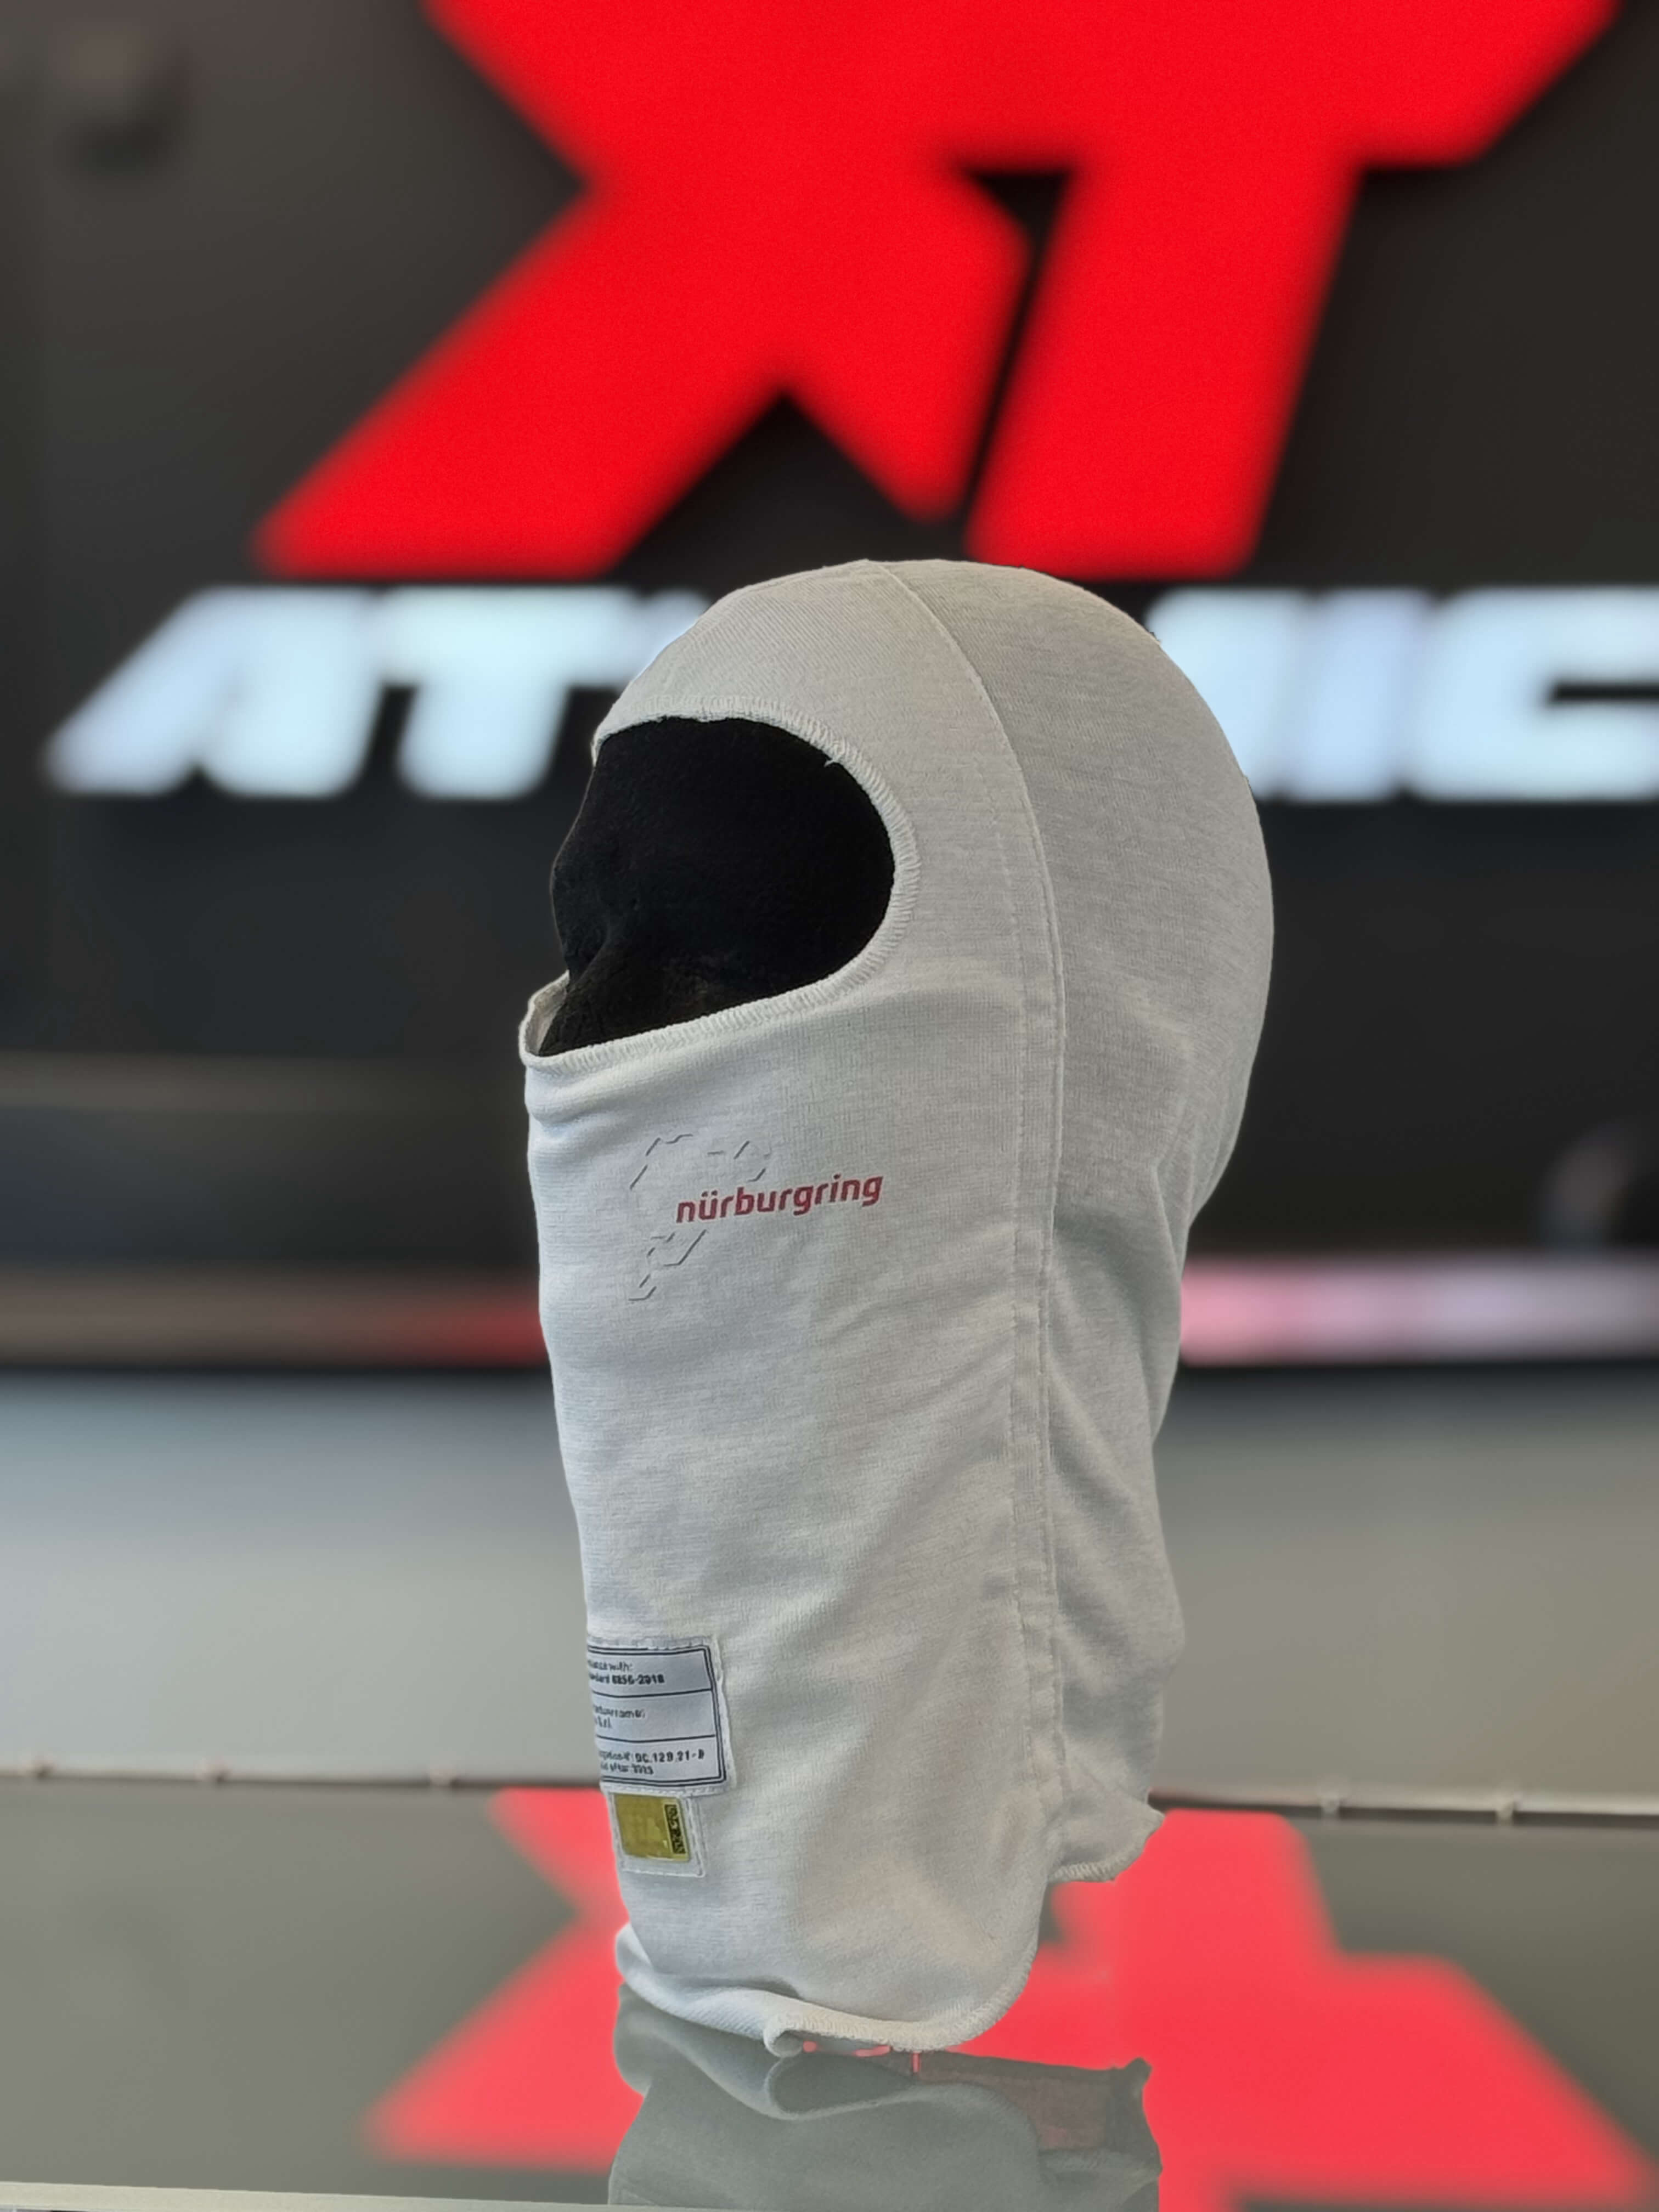 ARD AT018AZW-NBR Balaclava Atomic Nürburgring Edition FIA, White, One Size (Officially Licensed Nürburgring Product) Photo-1 